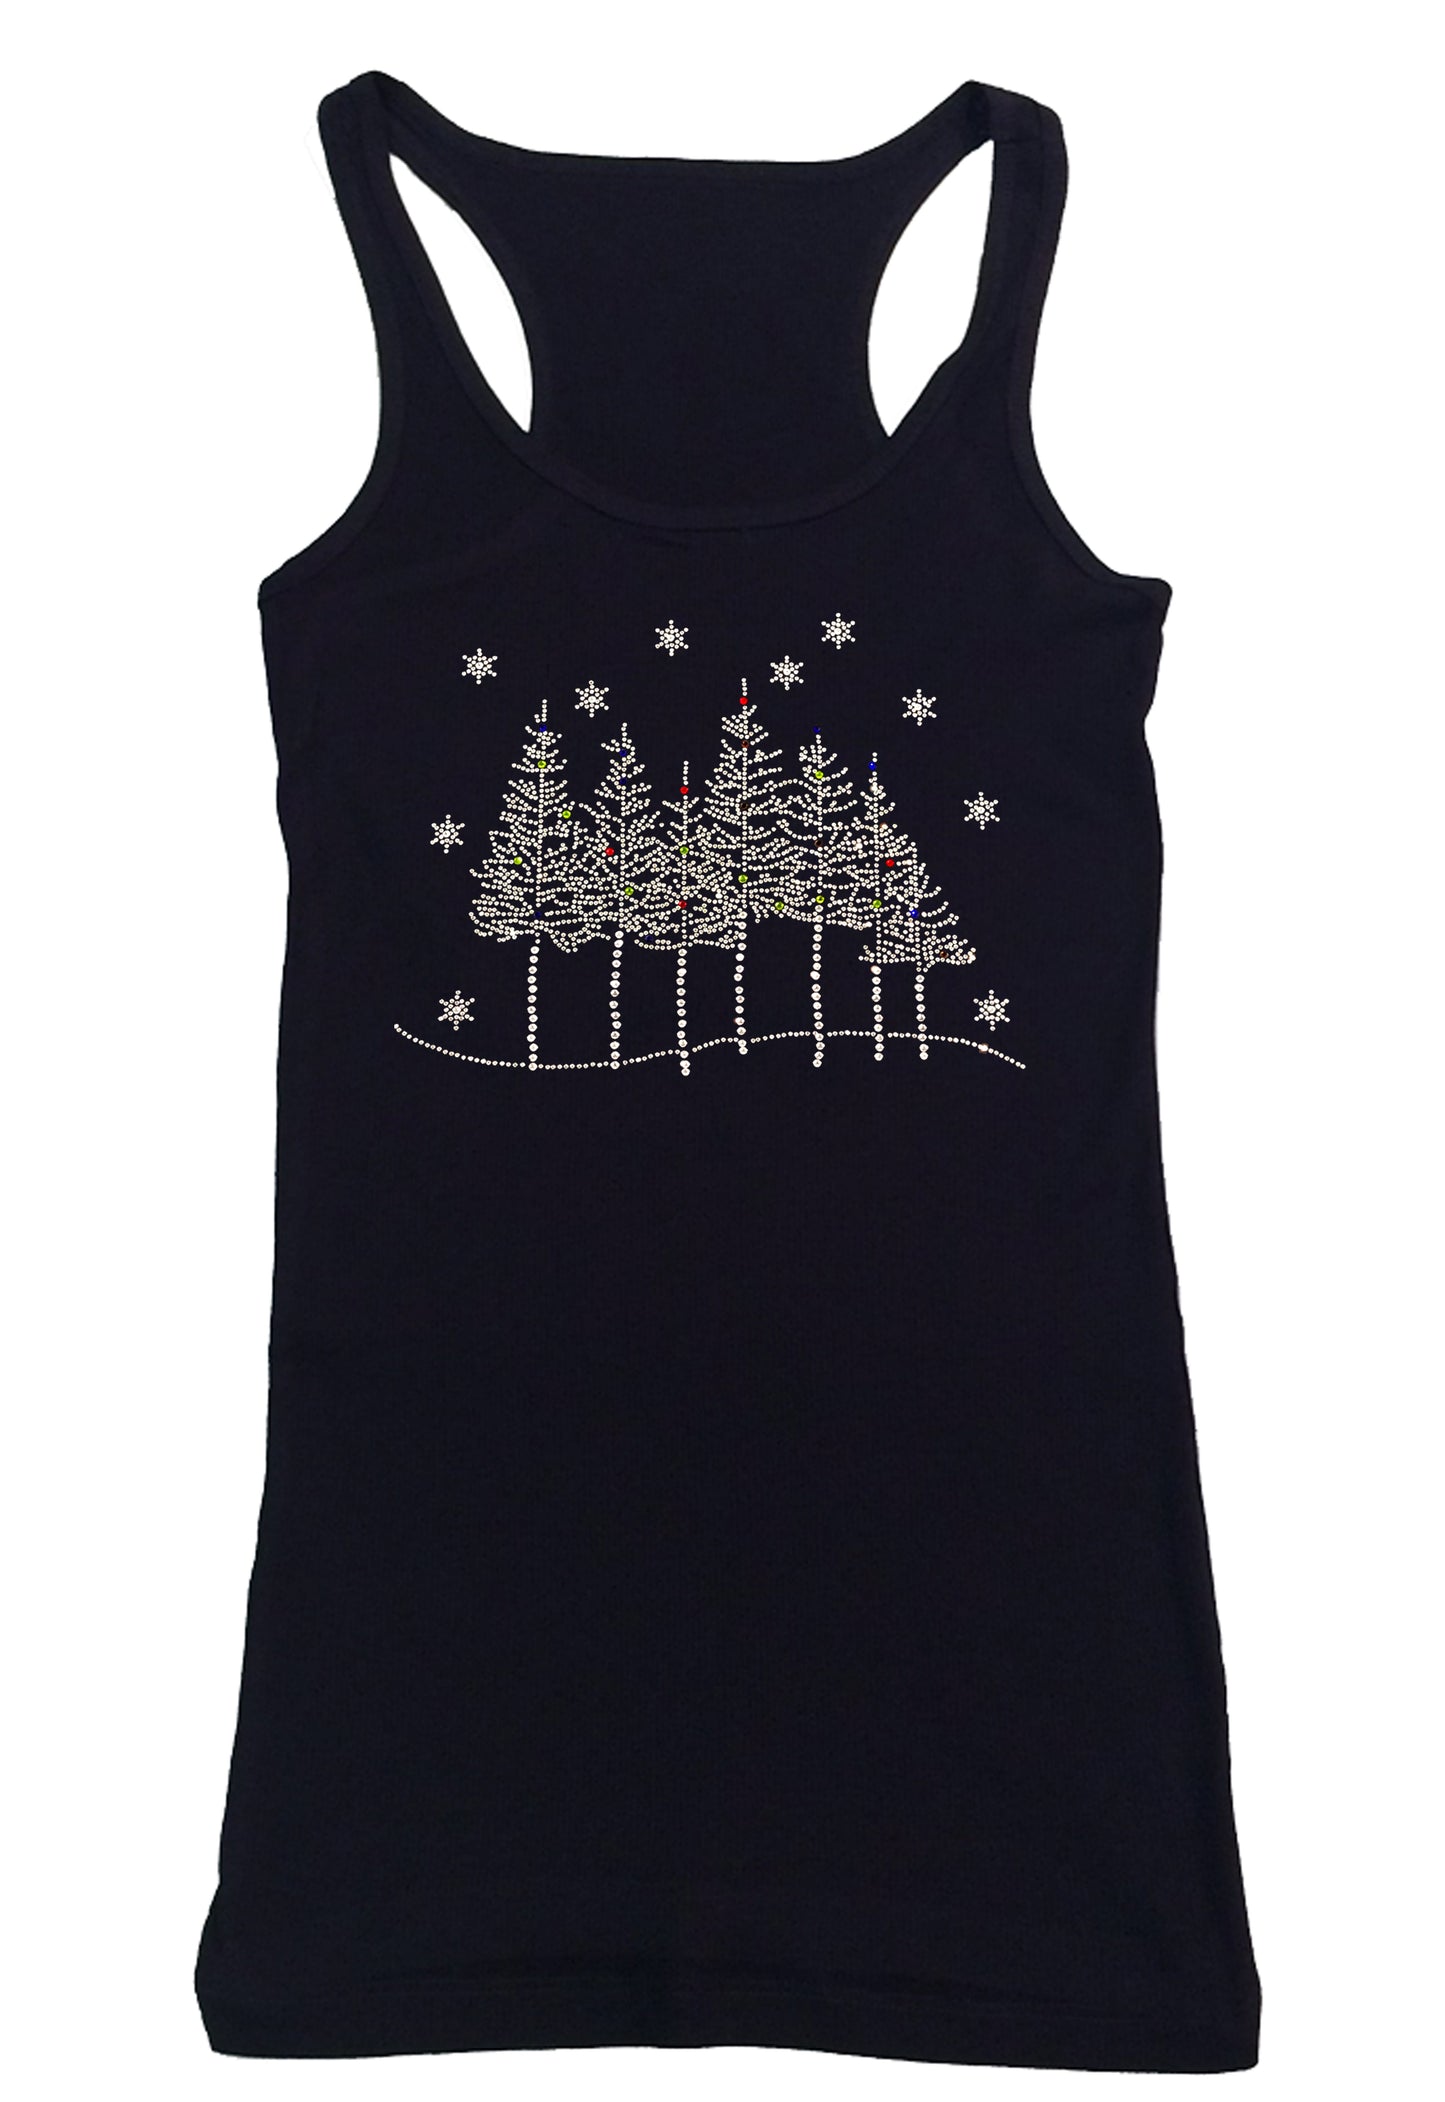 Womens T-shirt with Tree Line Scene with Snowflakes in Rhinestones